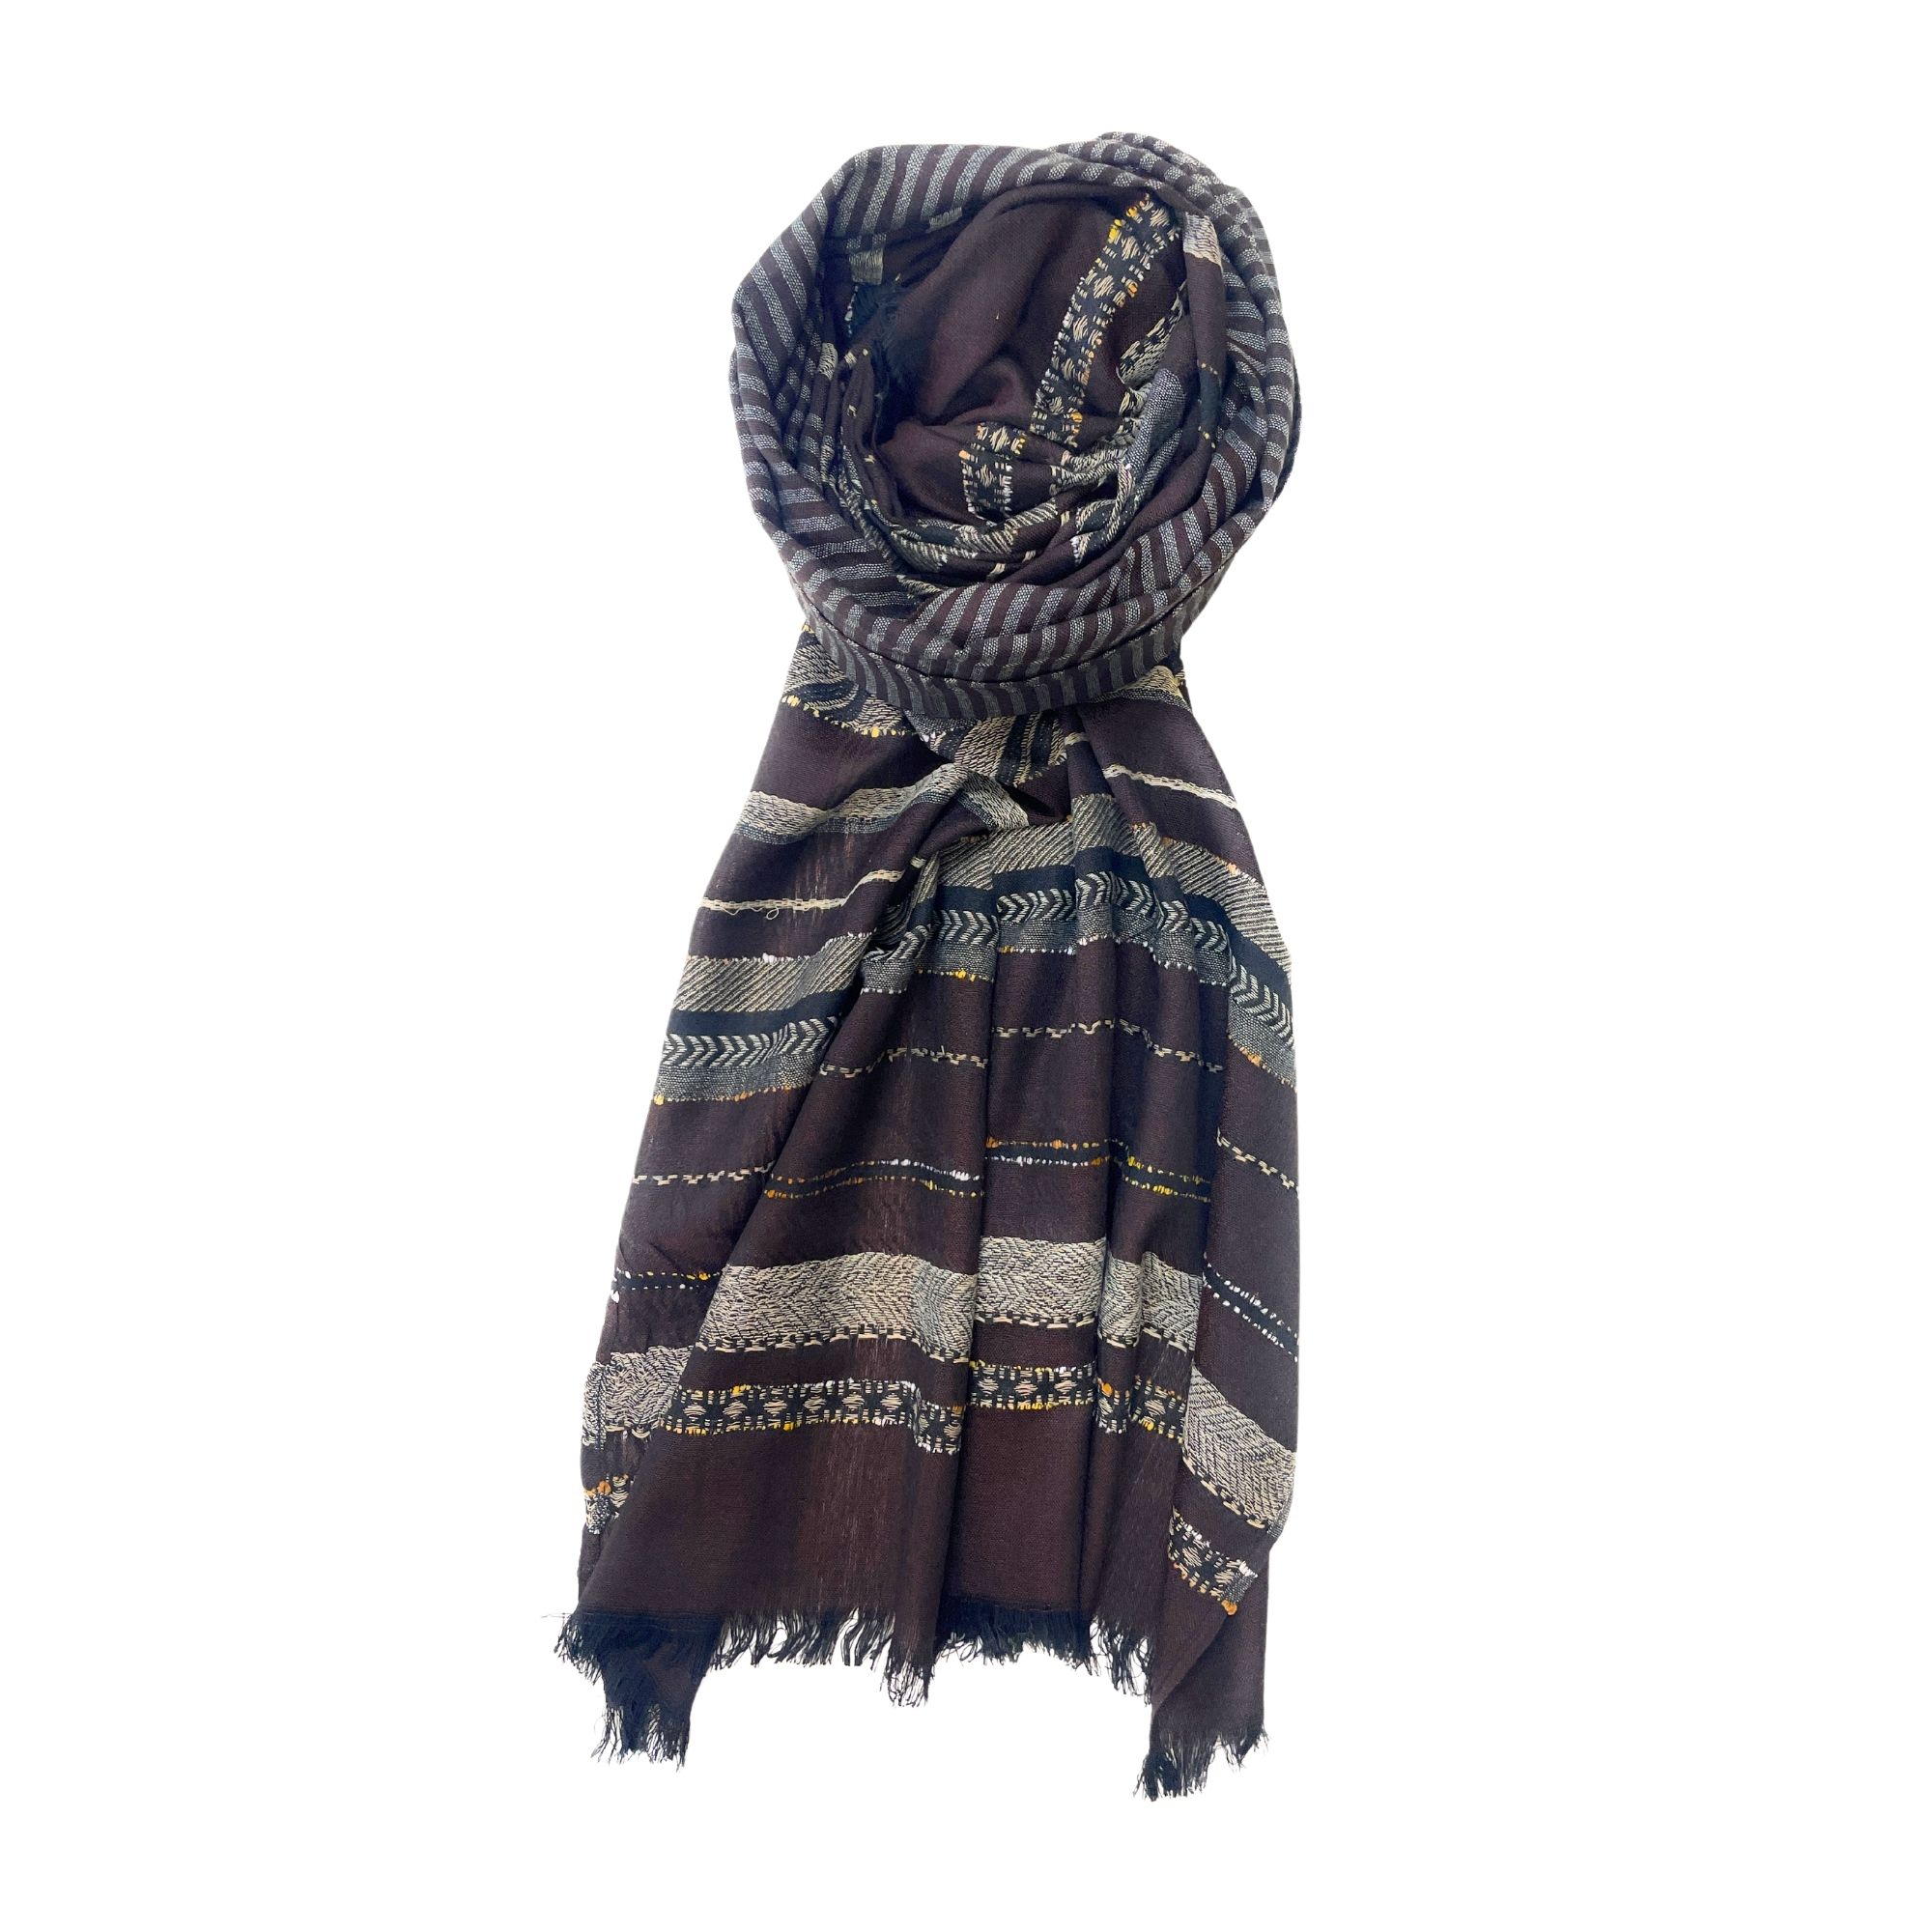 Woven Cotton Scarves for Women